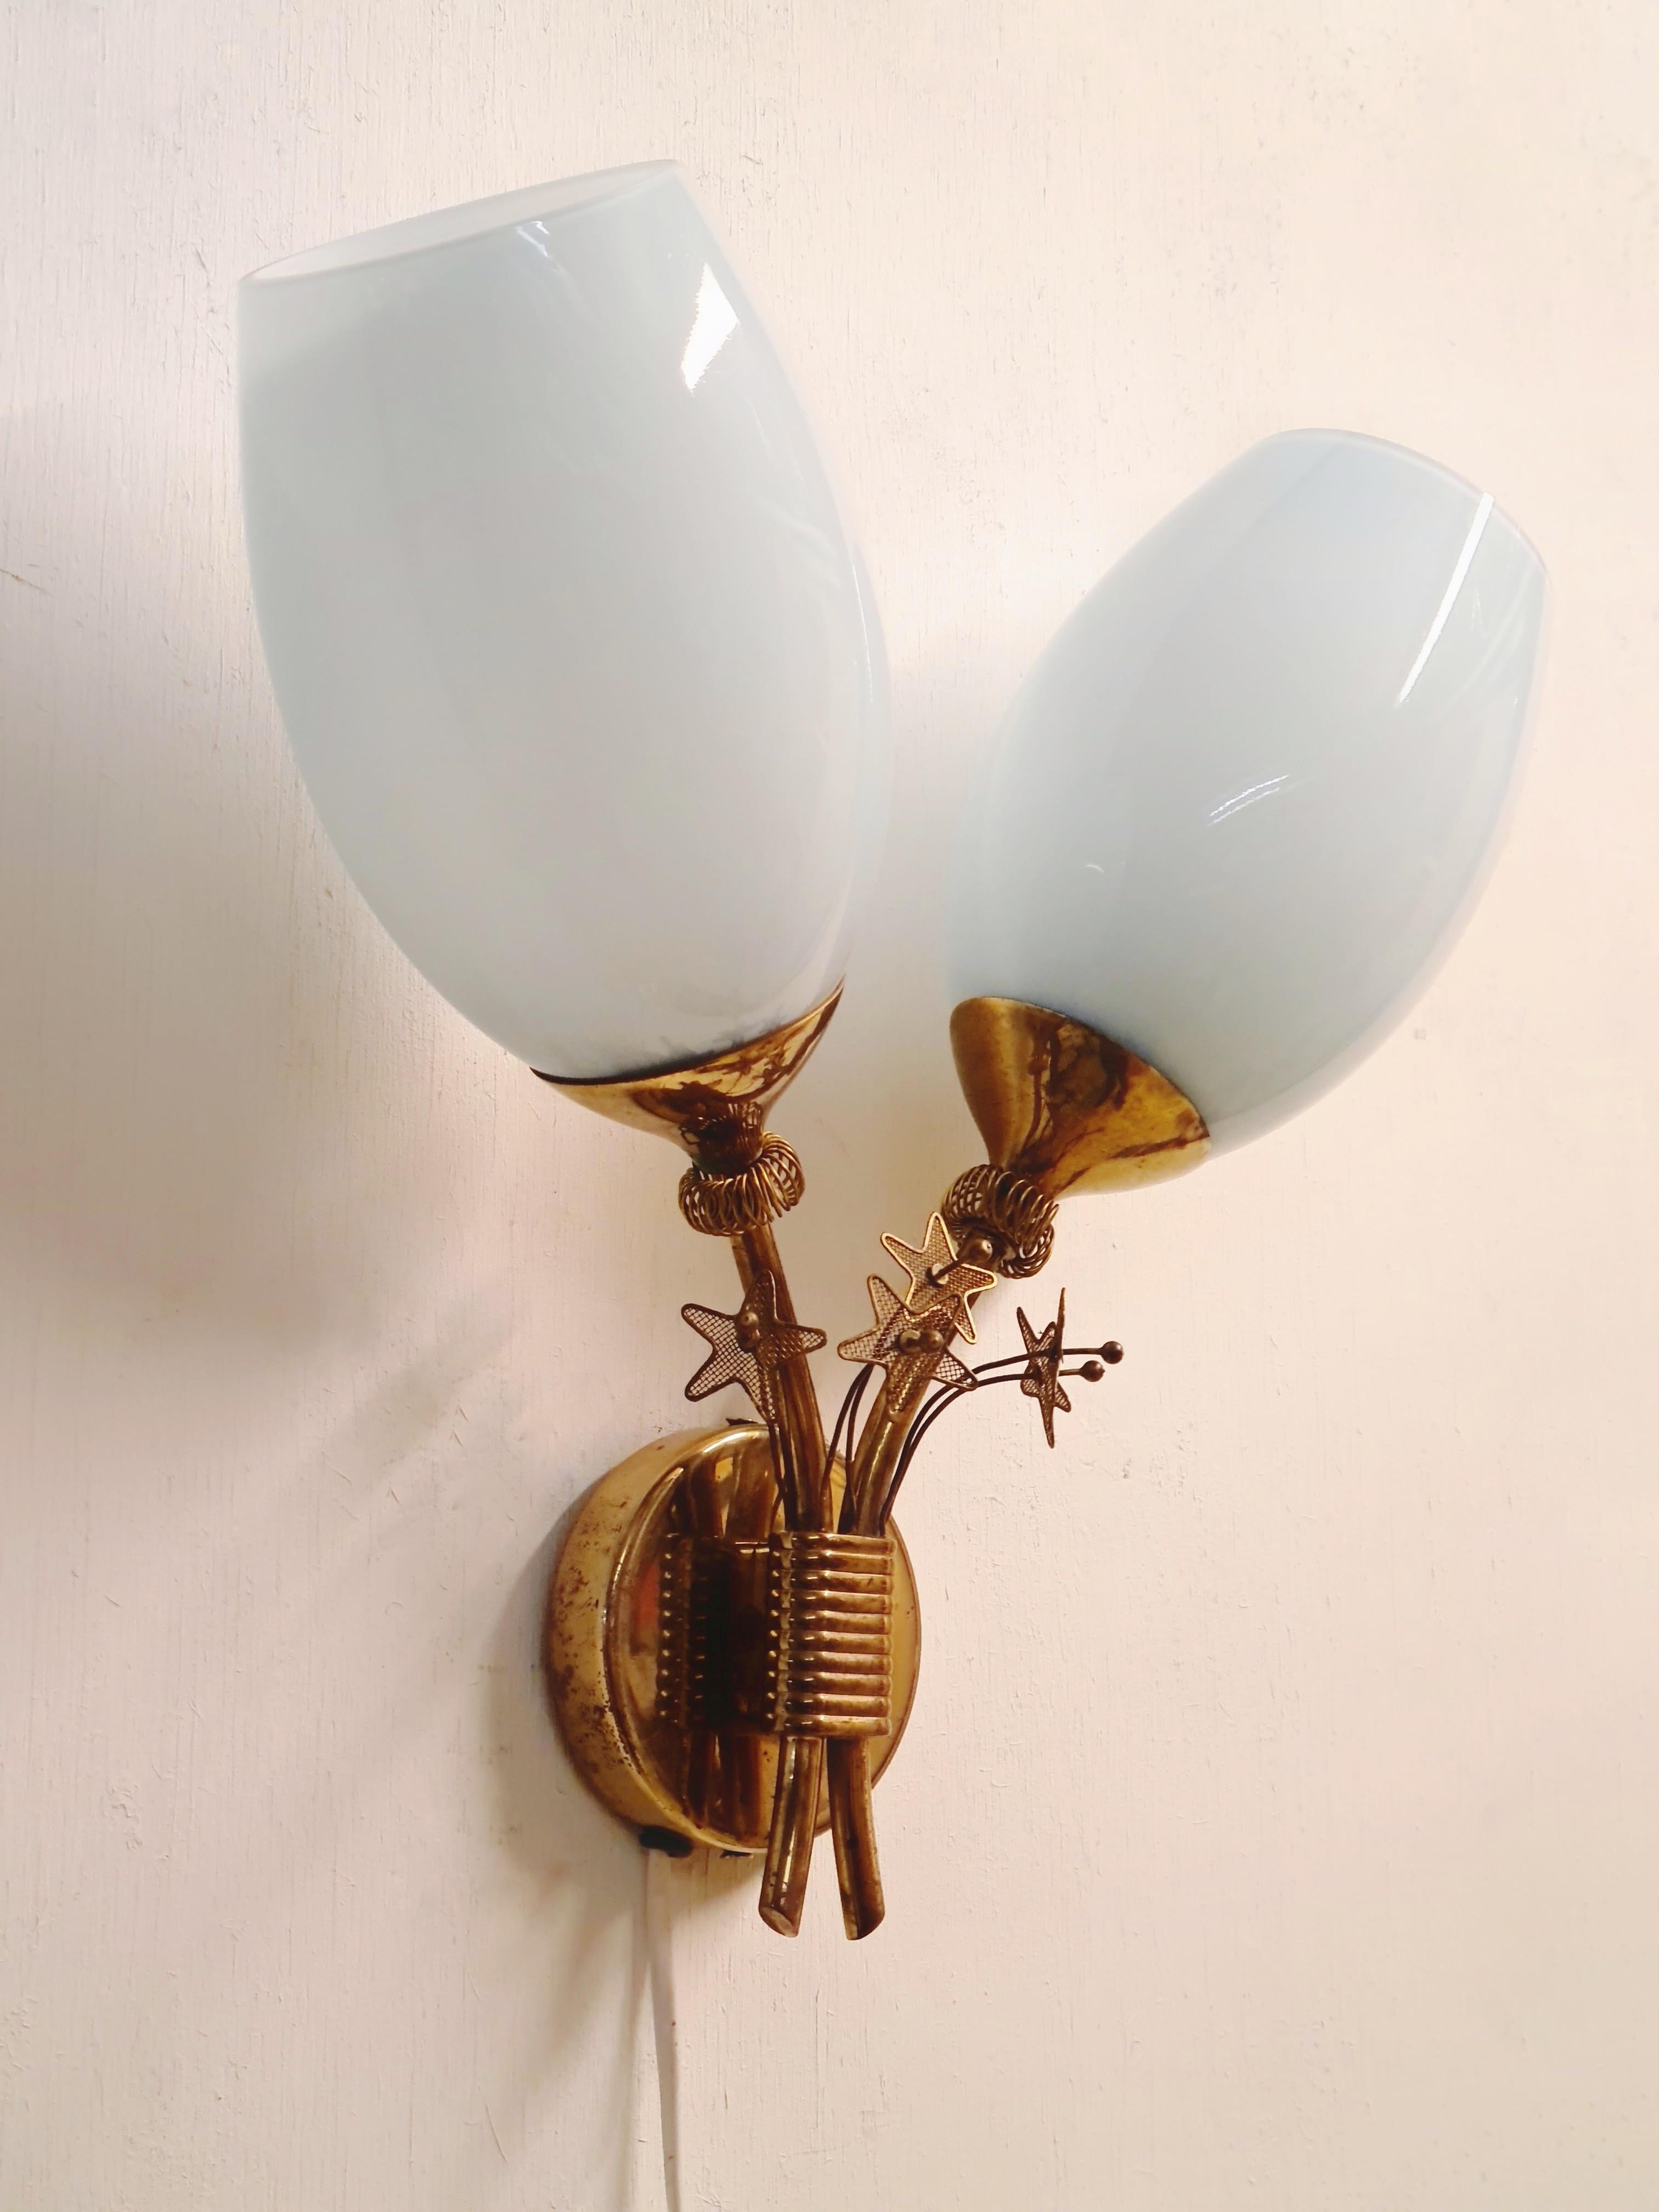 An extremely rare and brilliant wall lamp/sconce by Paavo Tynell, manufactured by Taito Oy in Finland in the 1950s. These kinds of wall lamps are highly sought after by collectors as well as end users world wide. The design is simple, pragmatic and